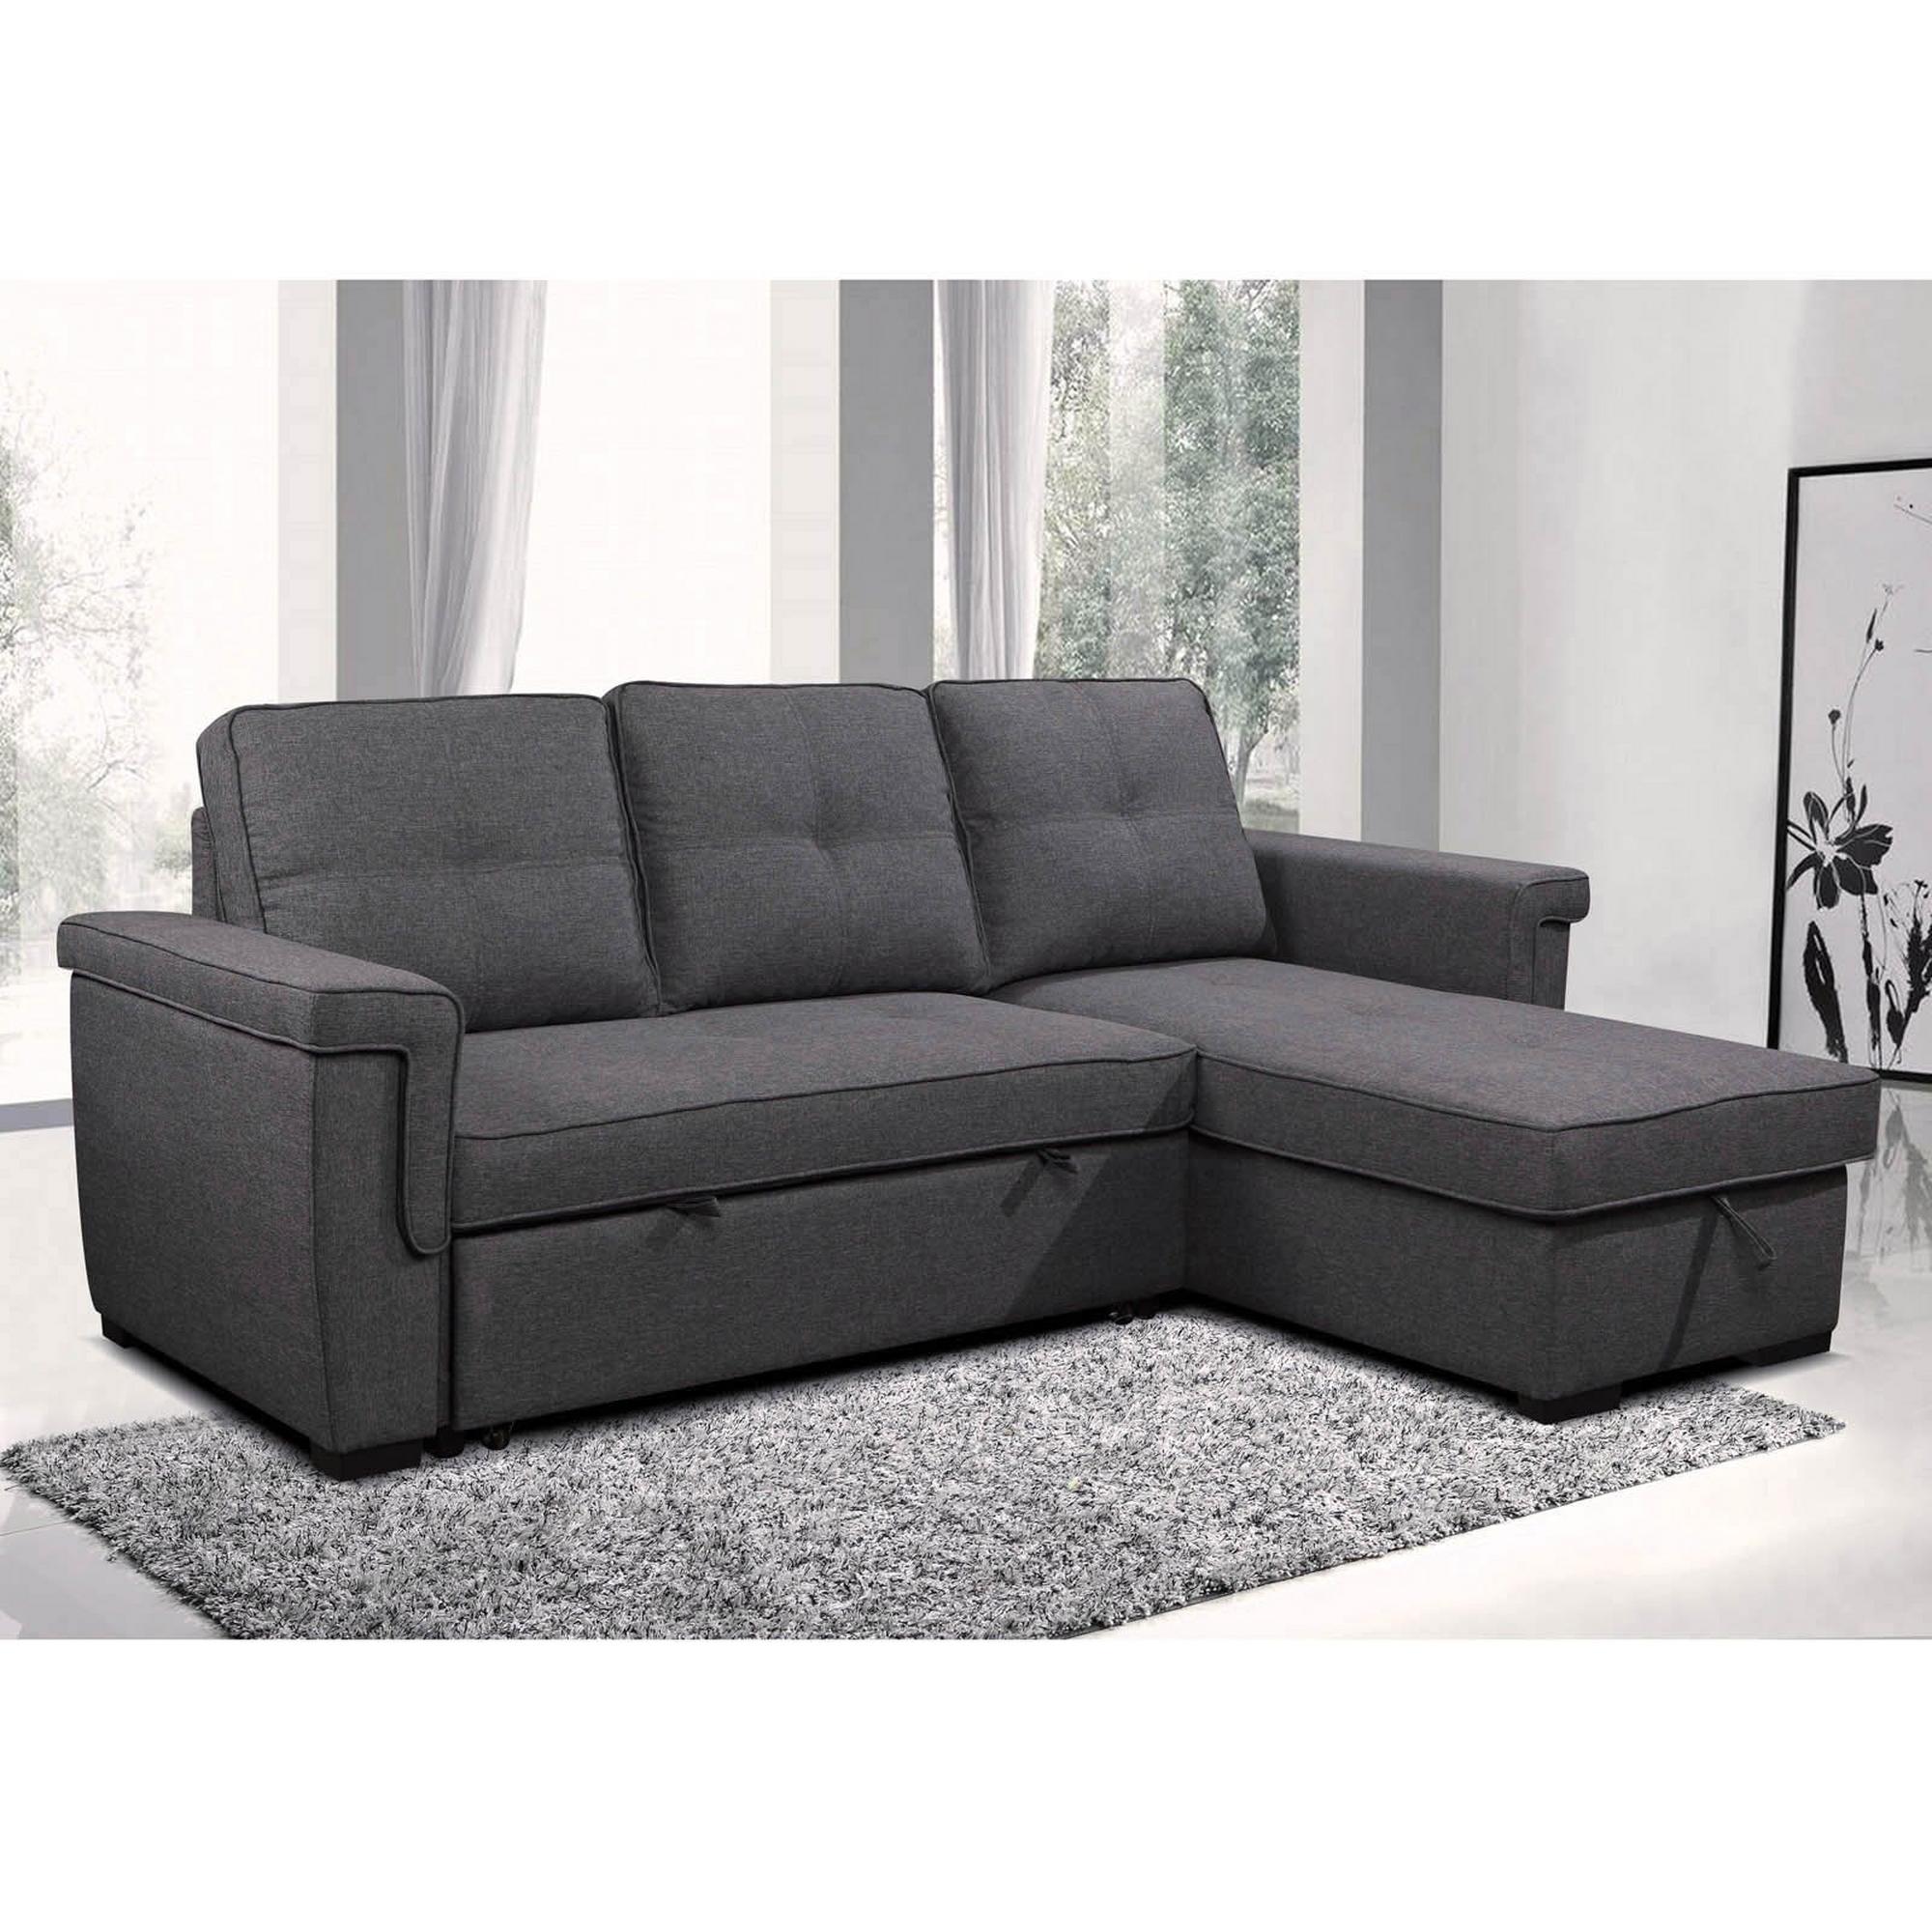 Korrespondent Mejeriprodukter Daggry Rent to Own Amalfi 2 - Piece Brody Storage Chaise Sofa Bed at Aaron's today!